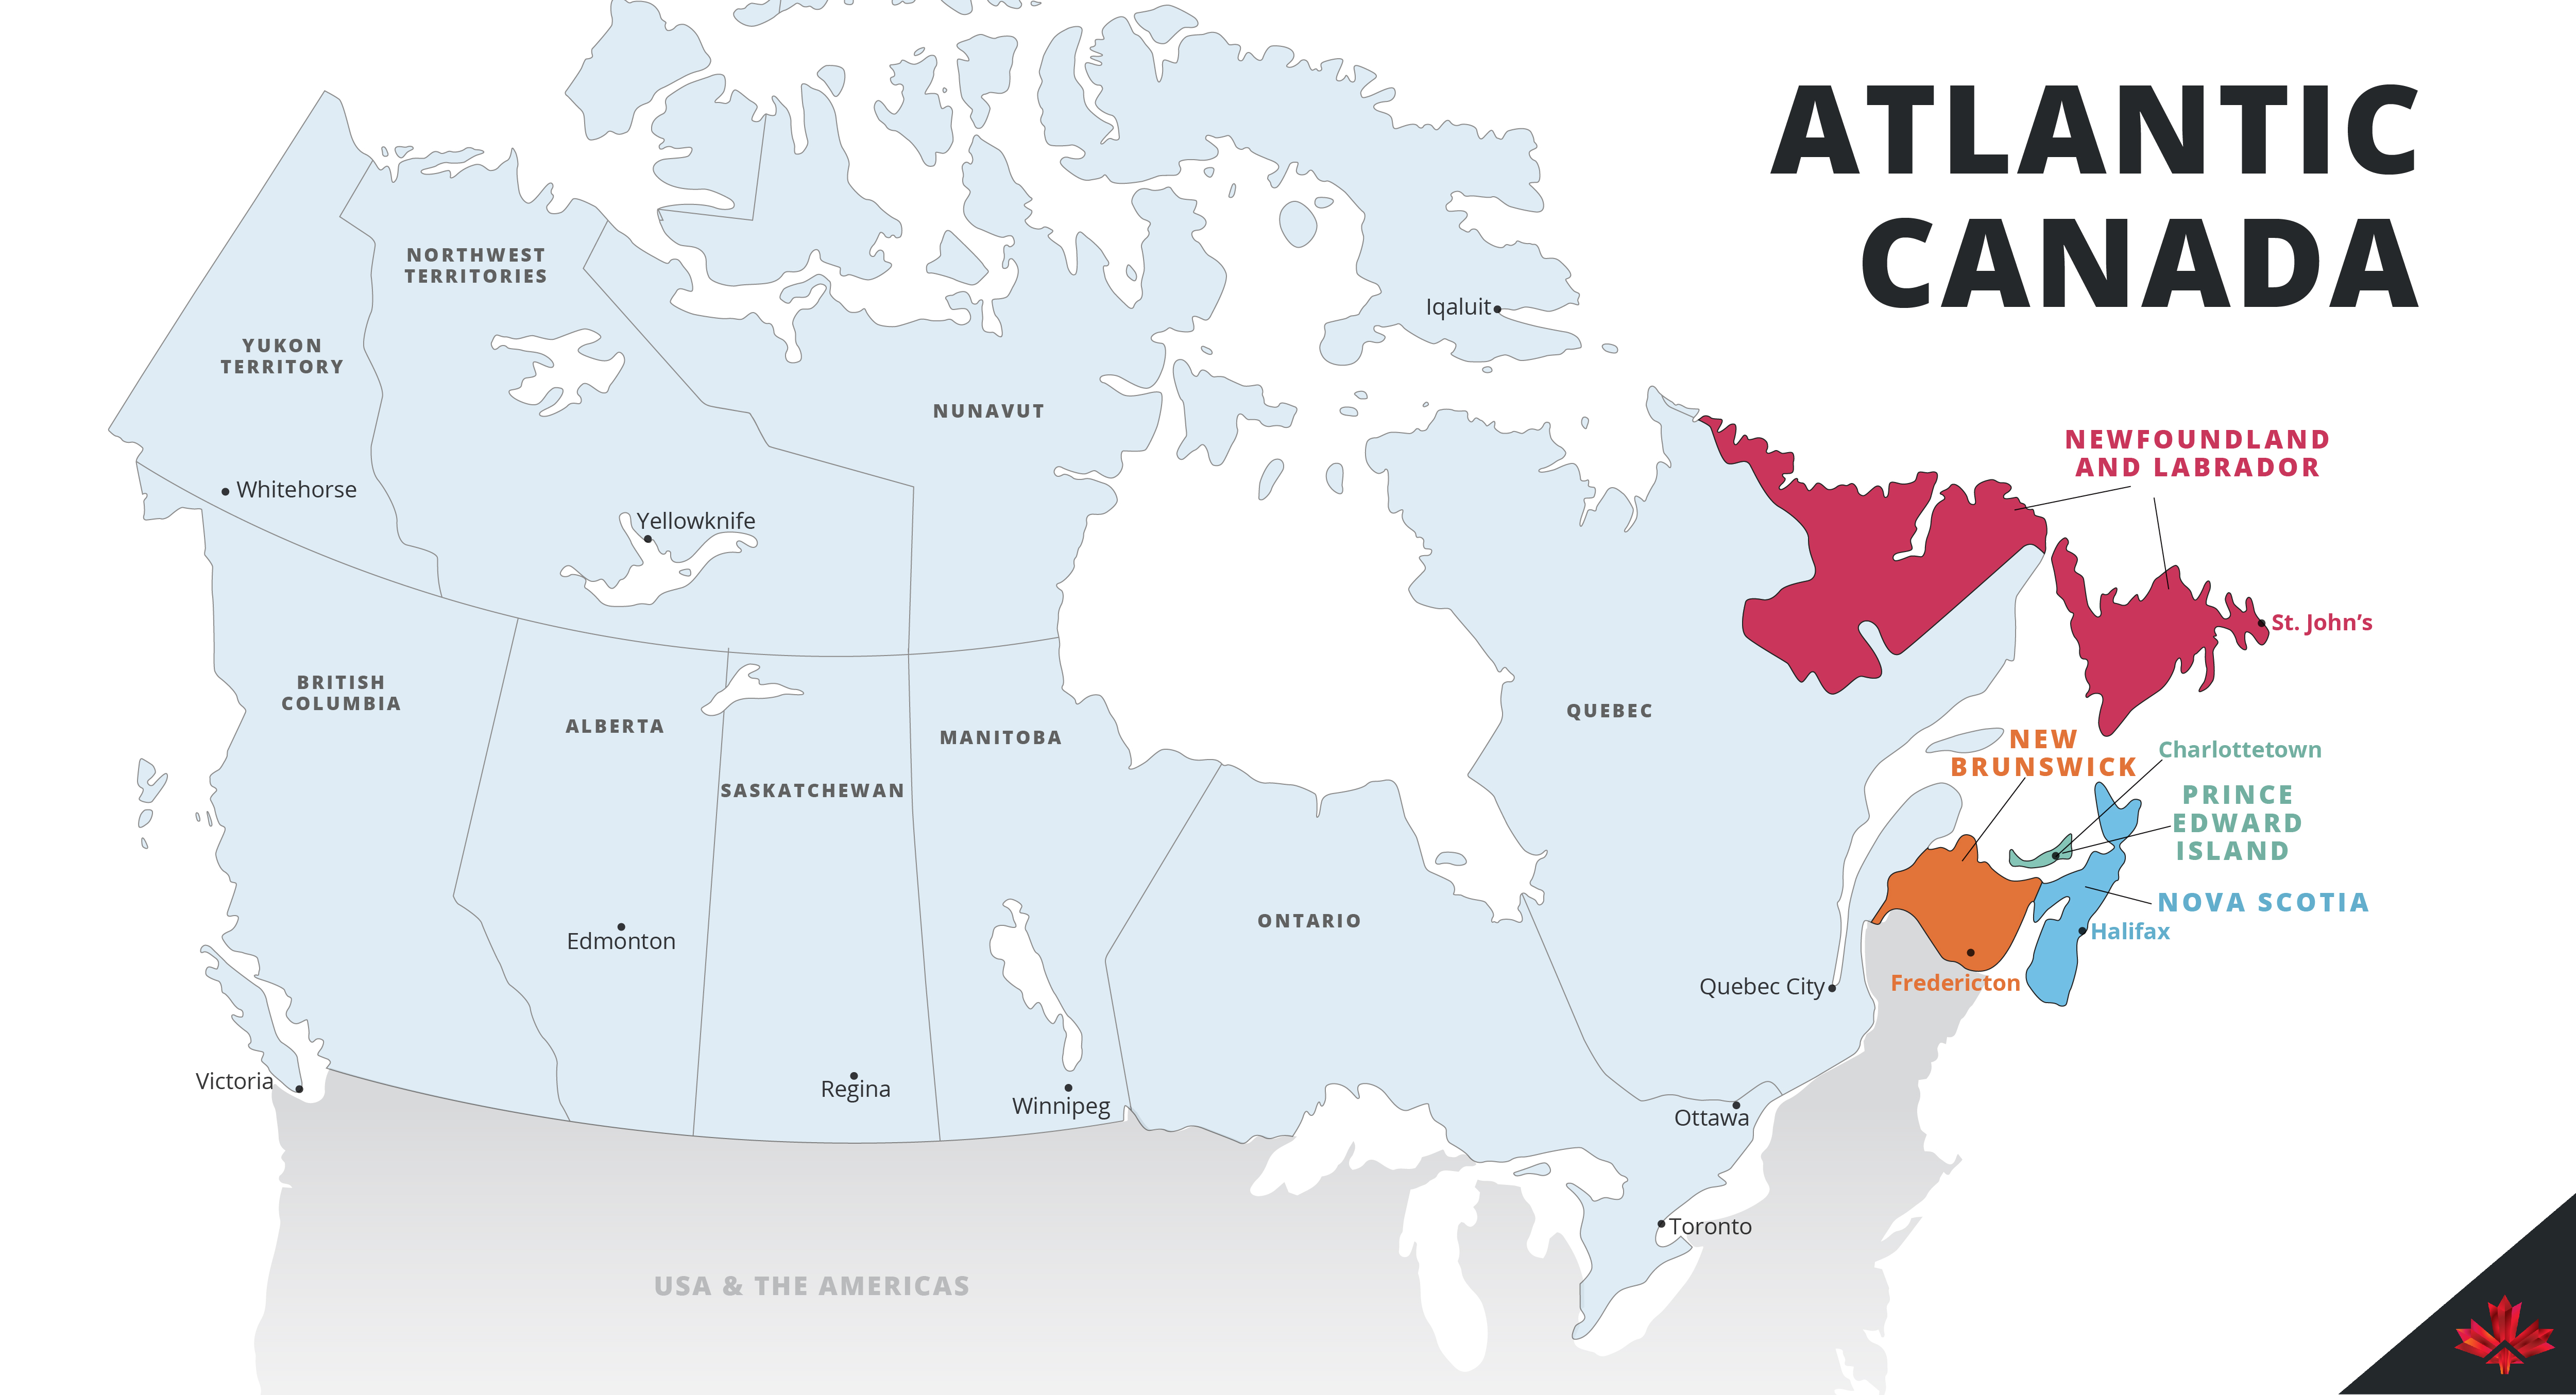 Map of Canada with Atlantic Canada provinces highlighted